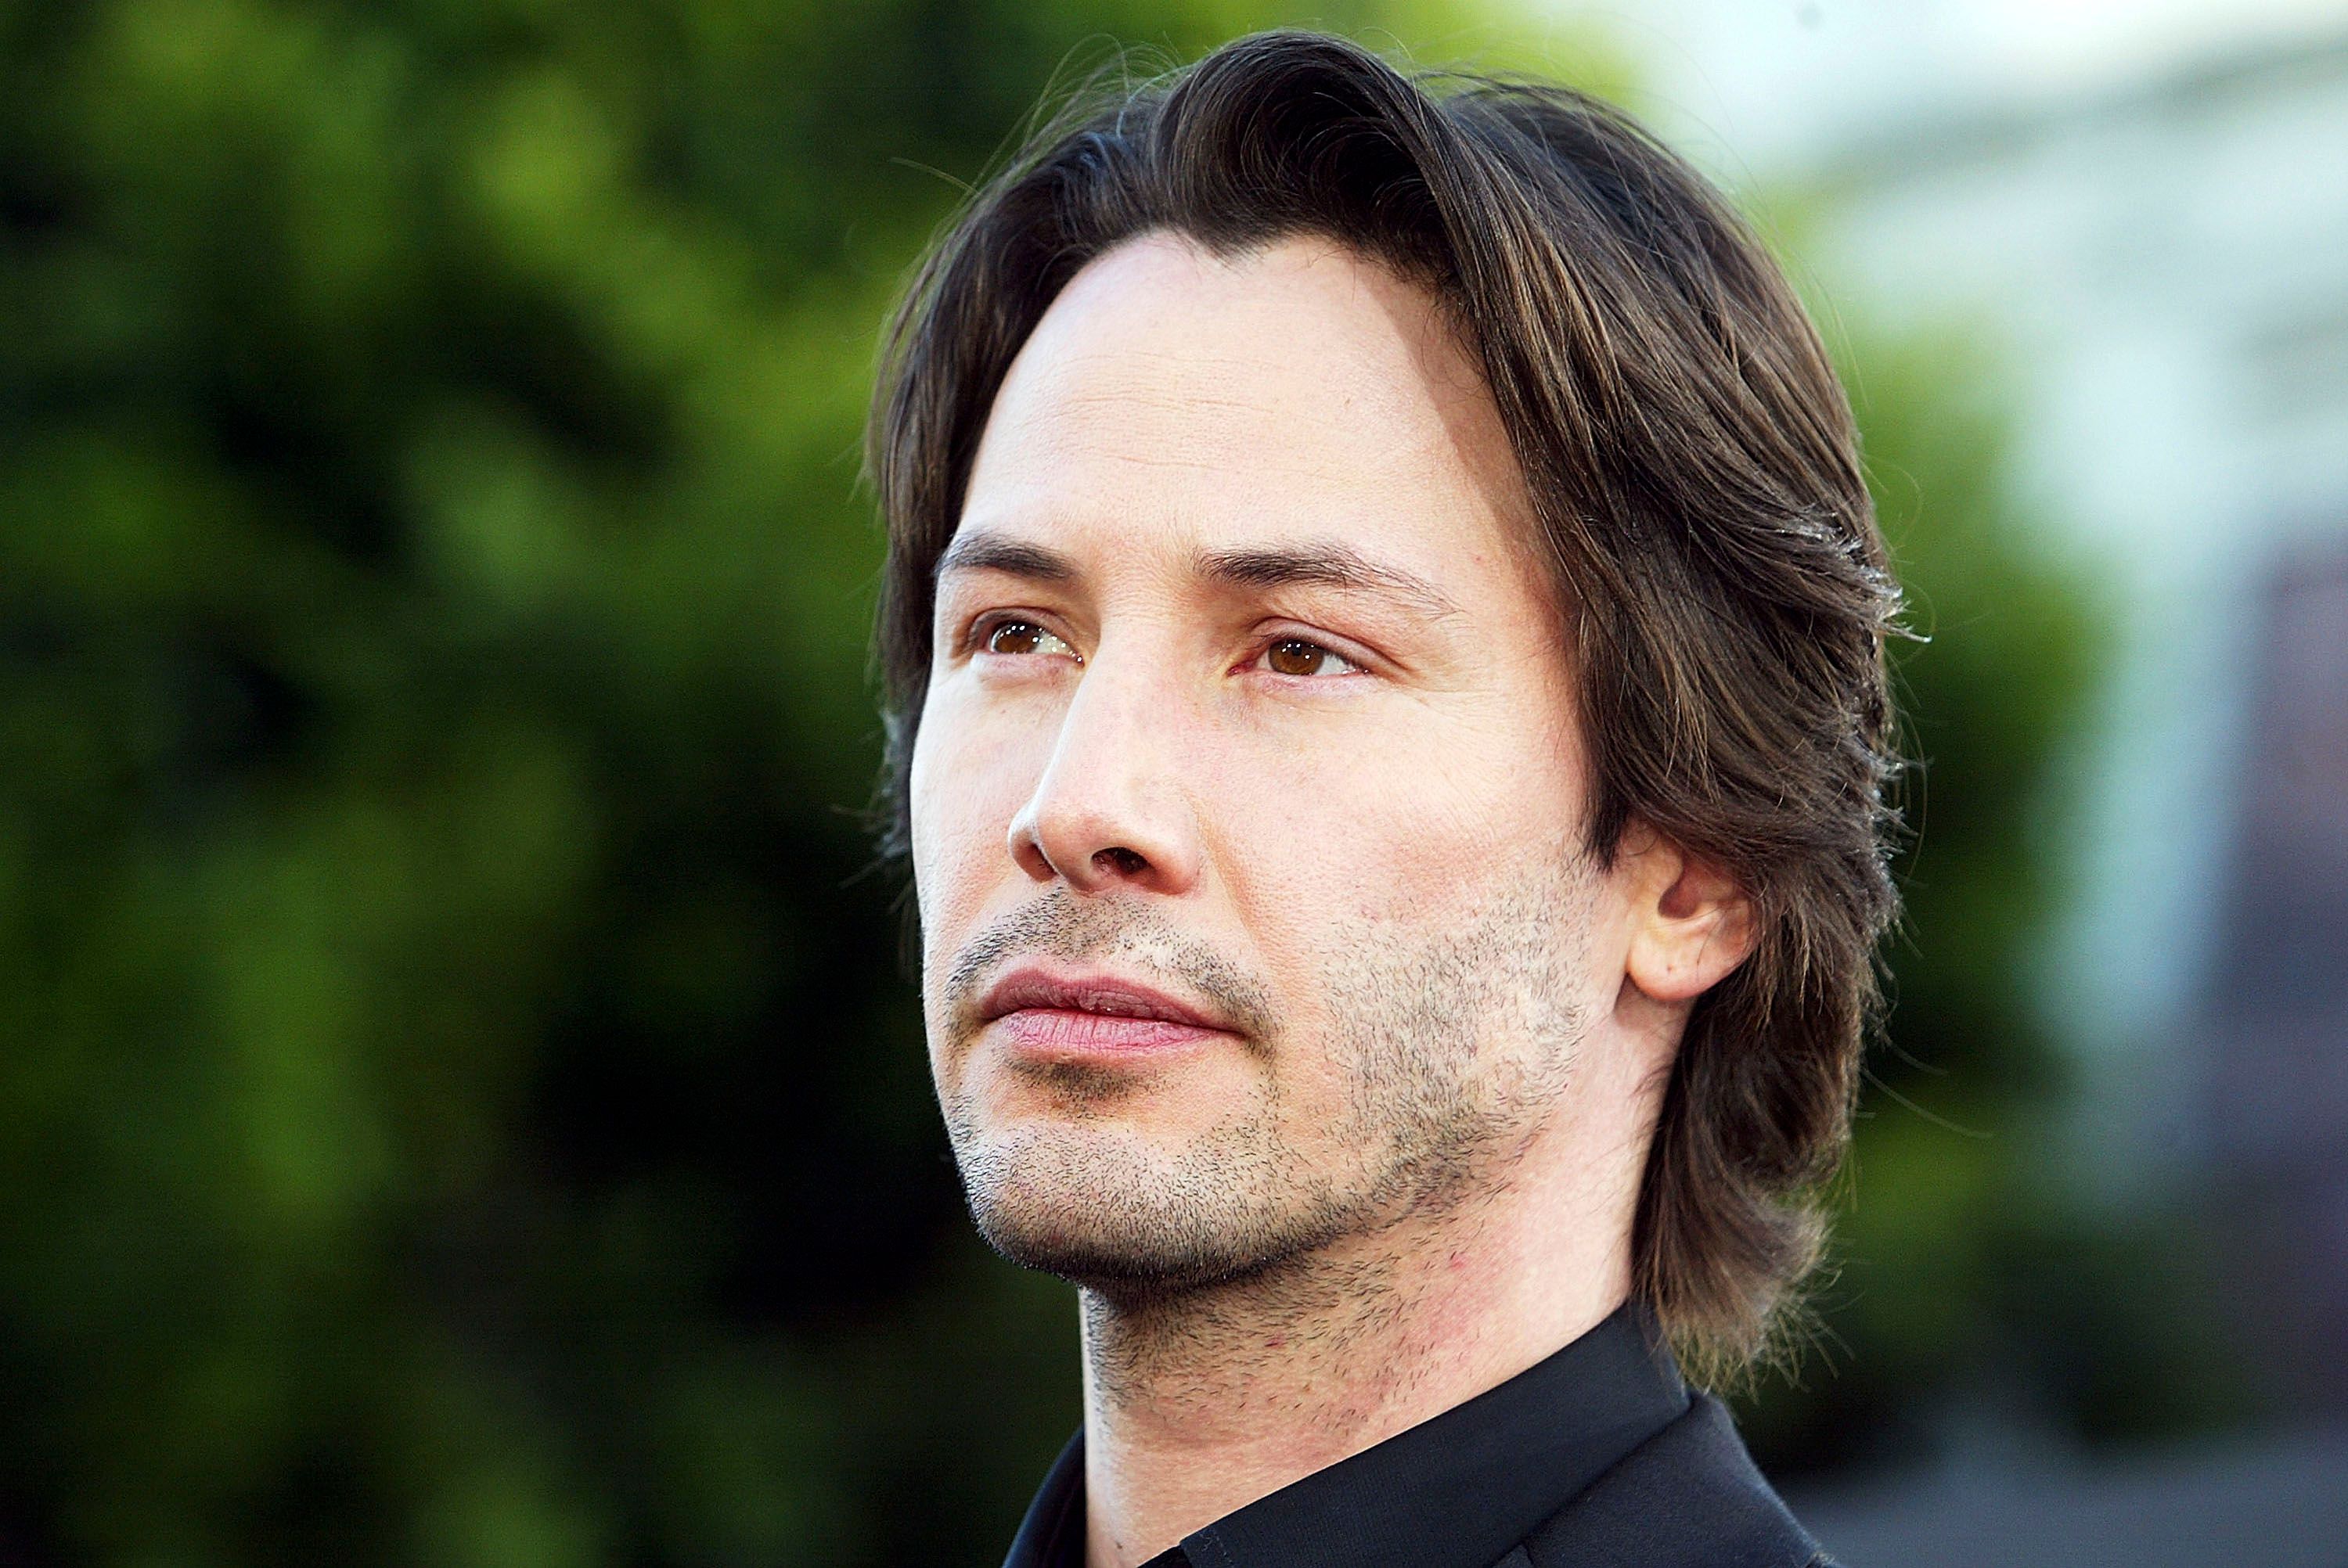 Keanu Reeves attends "The Matrix Reloaded" premiere at the Village Theater on May 7, 2003, in Los Angeles, California. | Source: Getty Images